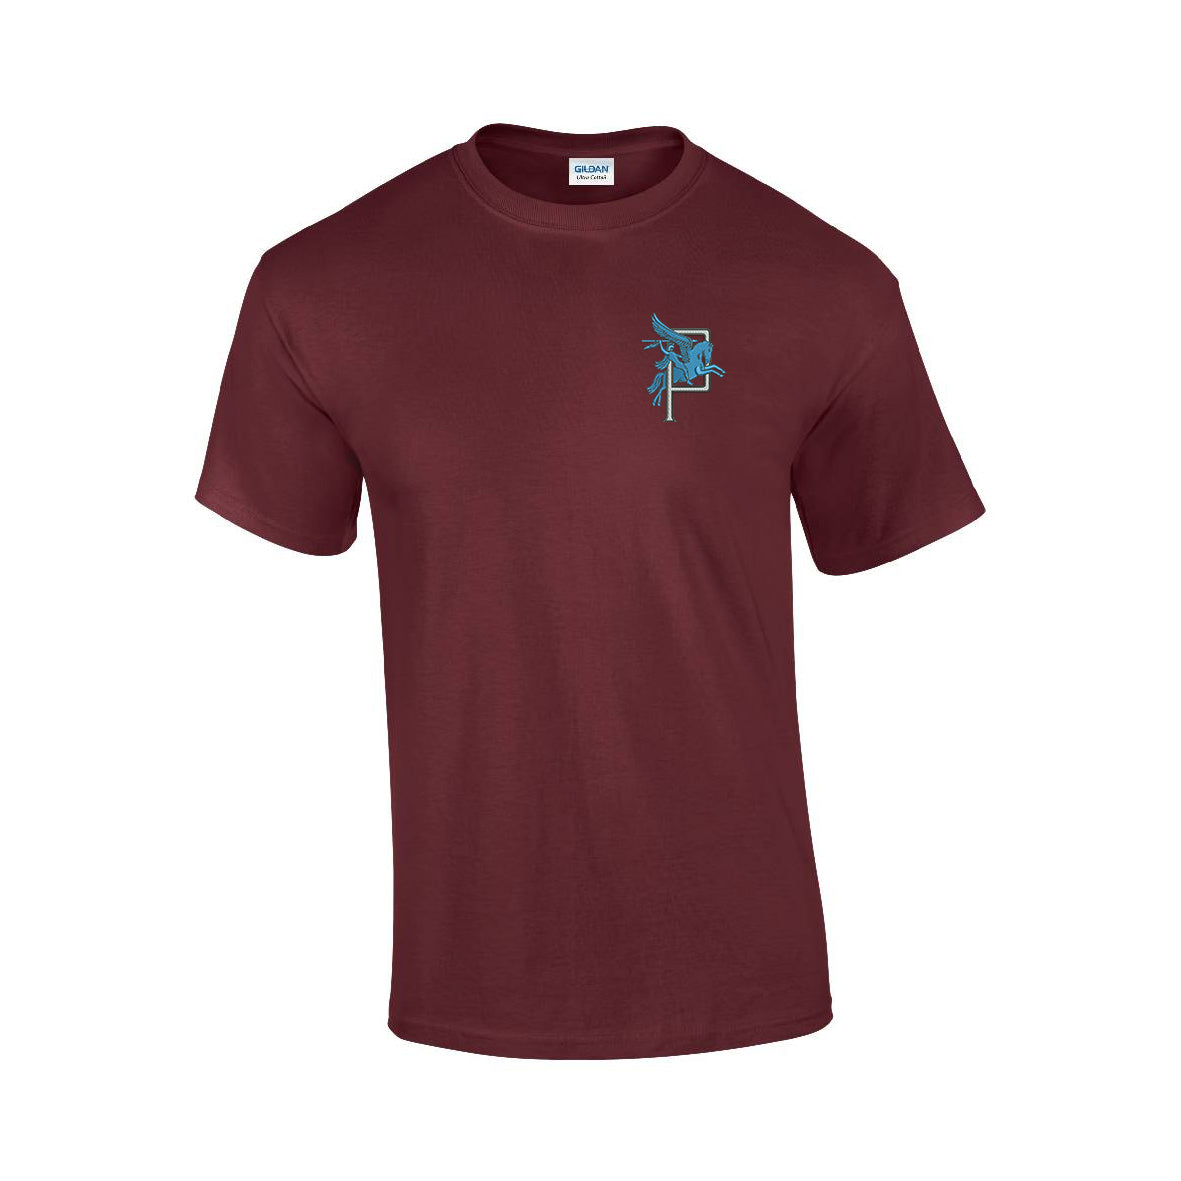 P-Company Premium Quality Embroidered T-Shirt - Bespoke Emerald Embroidery Ltd